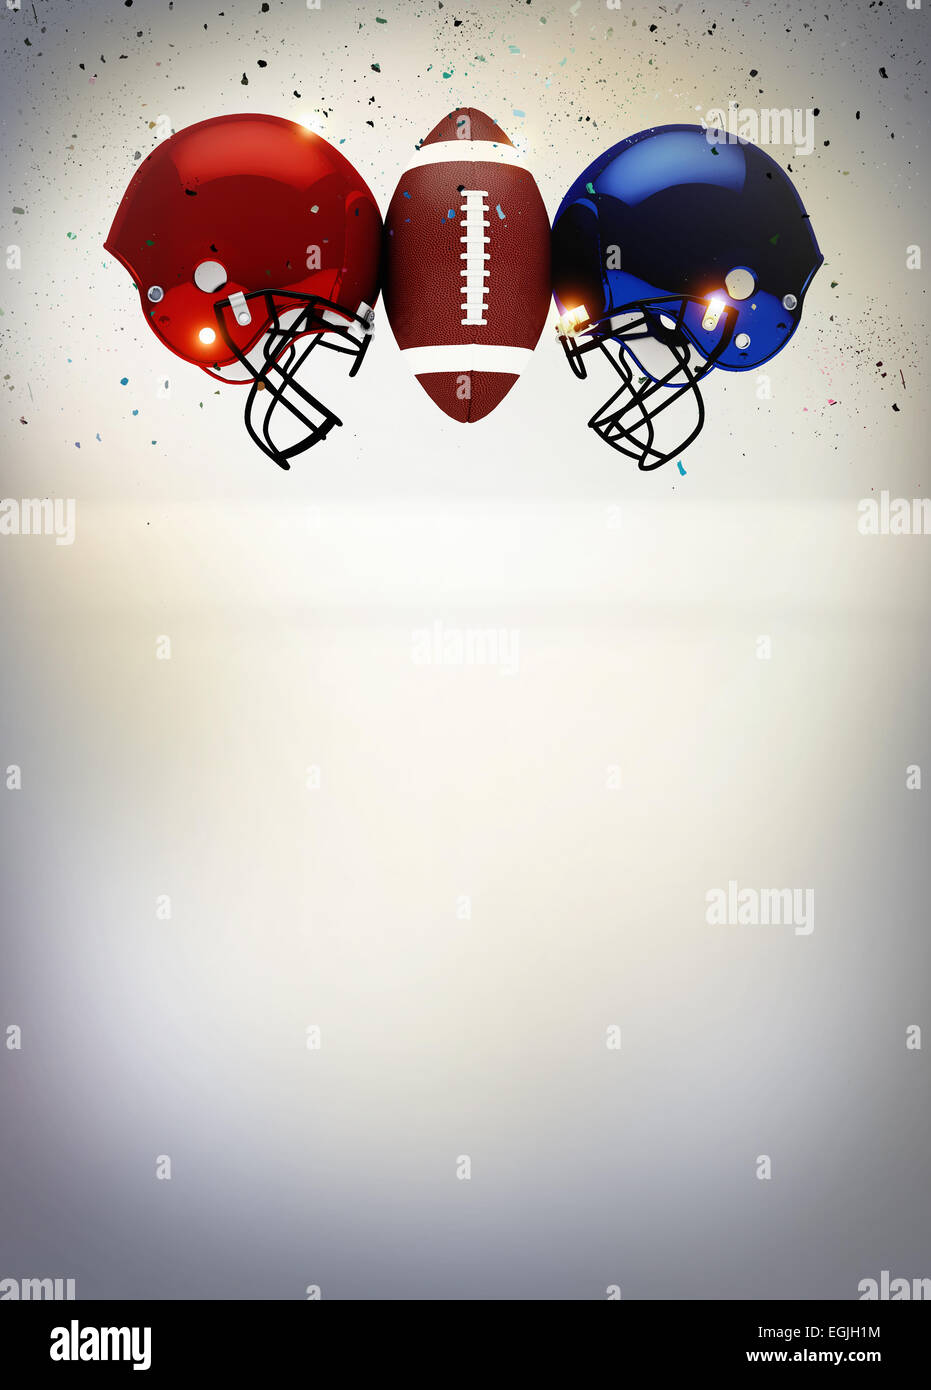 Abstract American Football invitation background with 